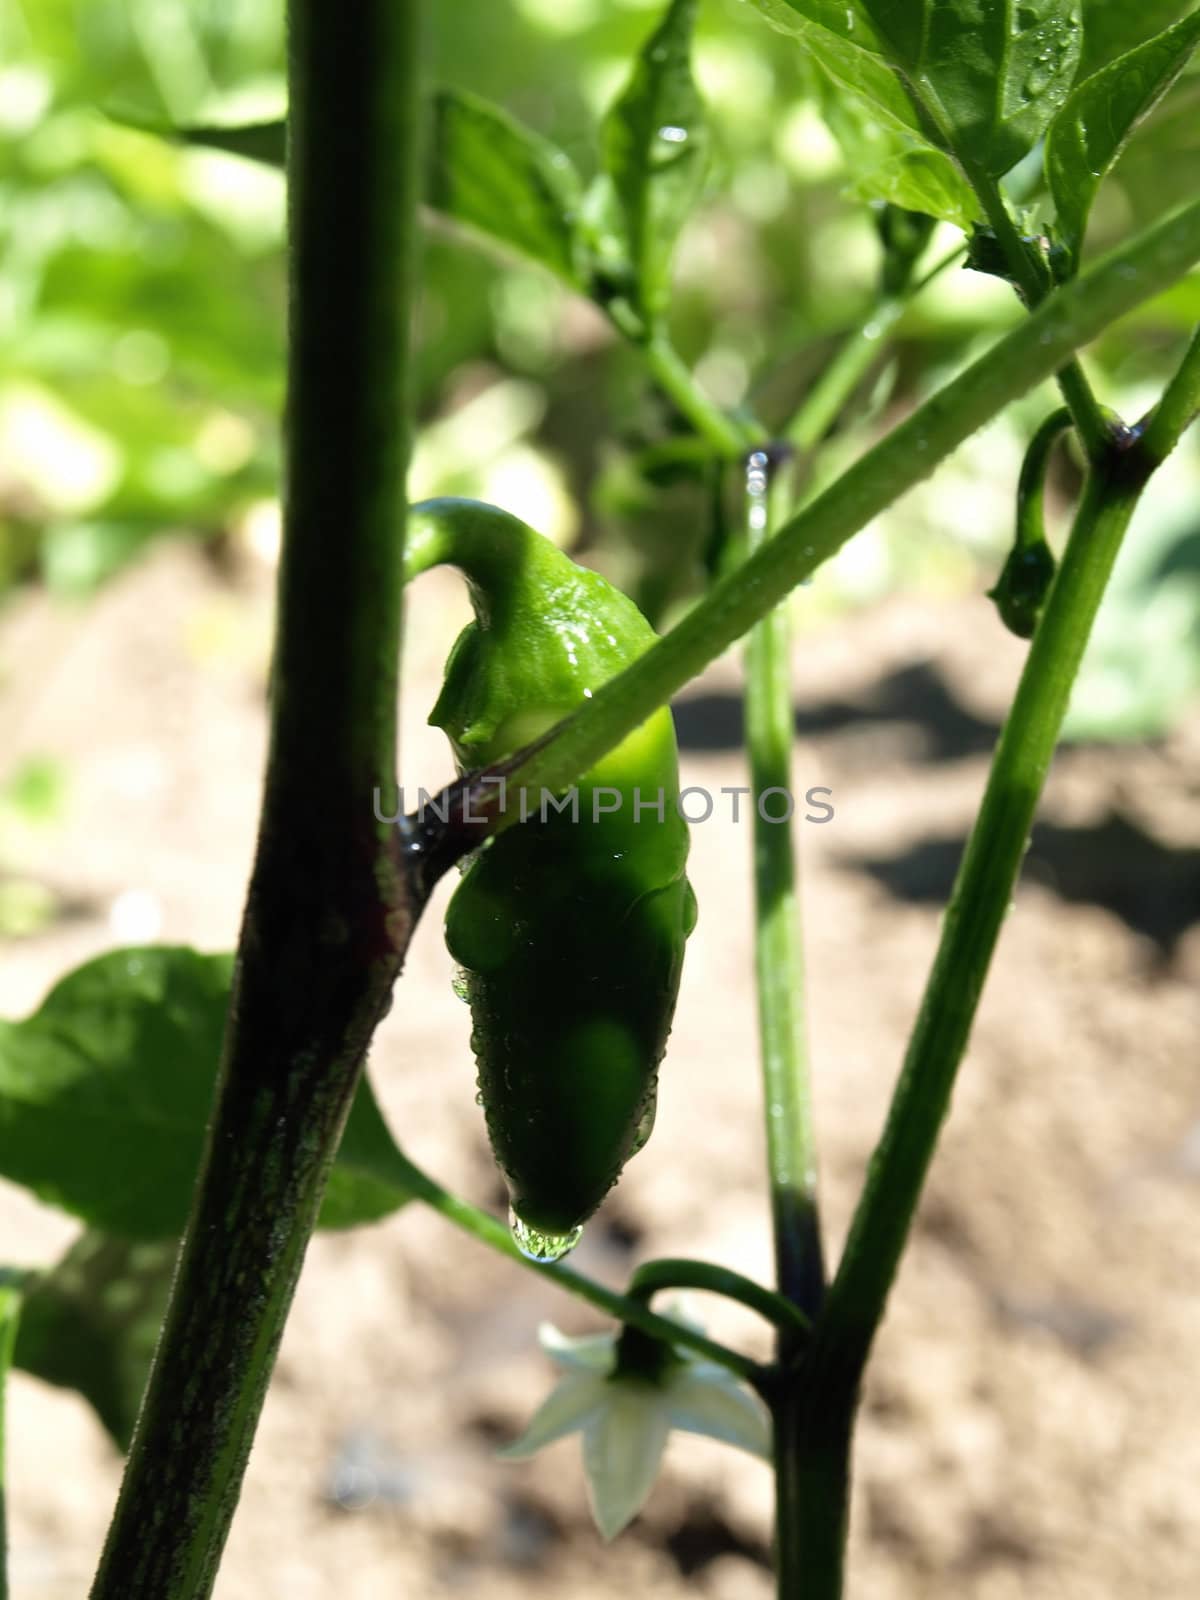 A fresh jalapeno pepper growing on the vine in a garden.